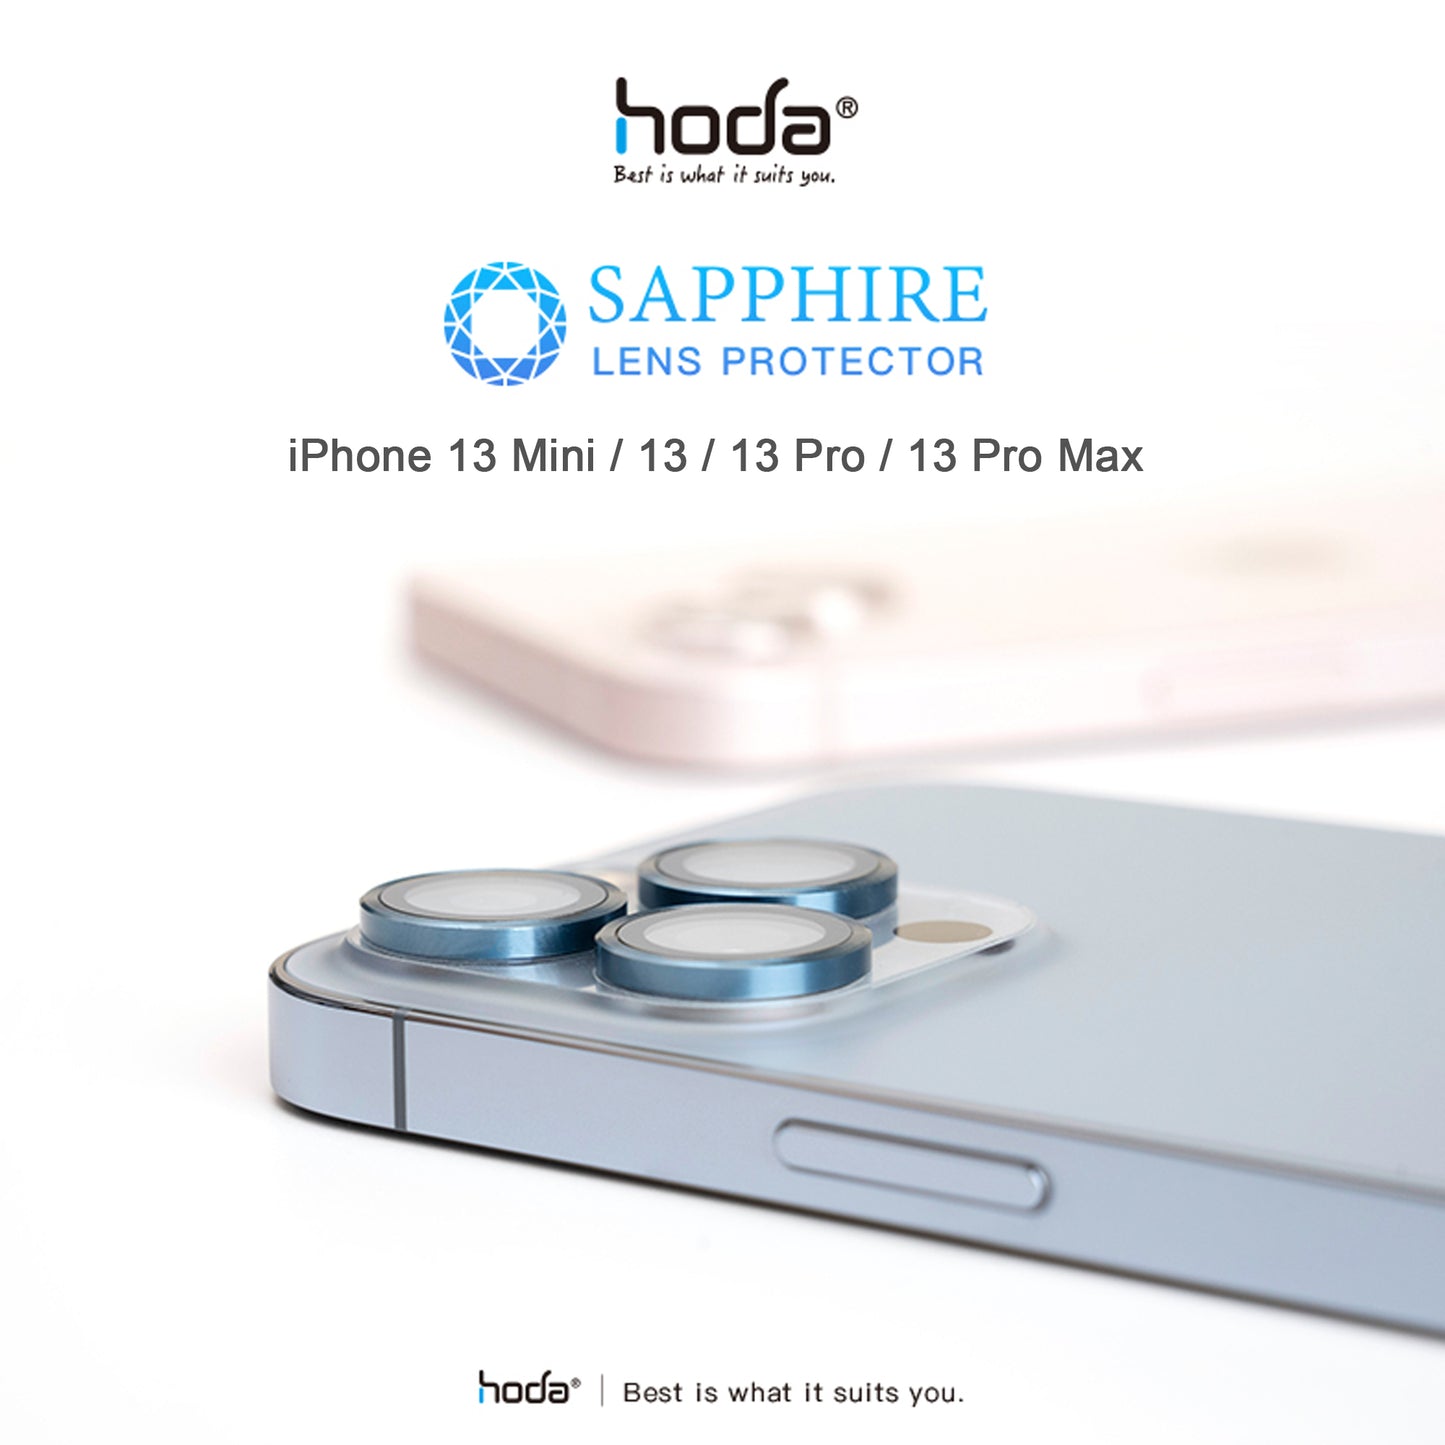 Hoda Sapphire Lens Protector for iPhone 13 Pro - 13 Pro Max - Flamed Titanium (3pcs) (Barcode: 4711103541371 )